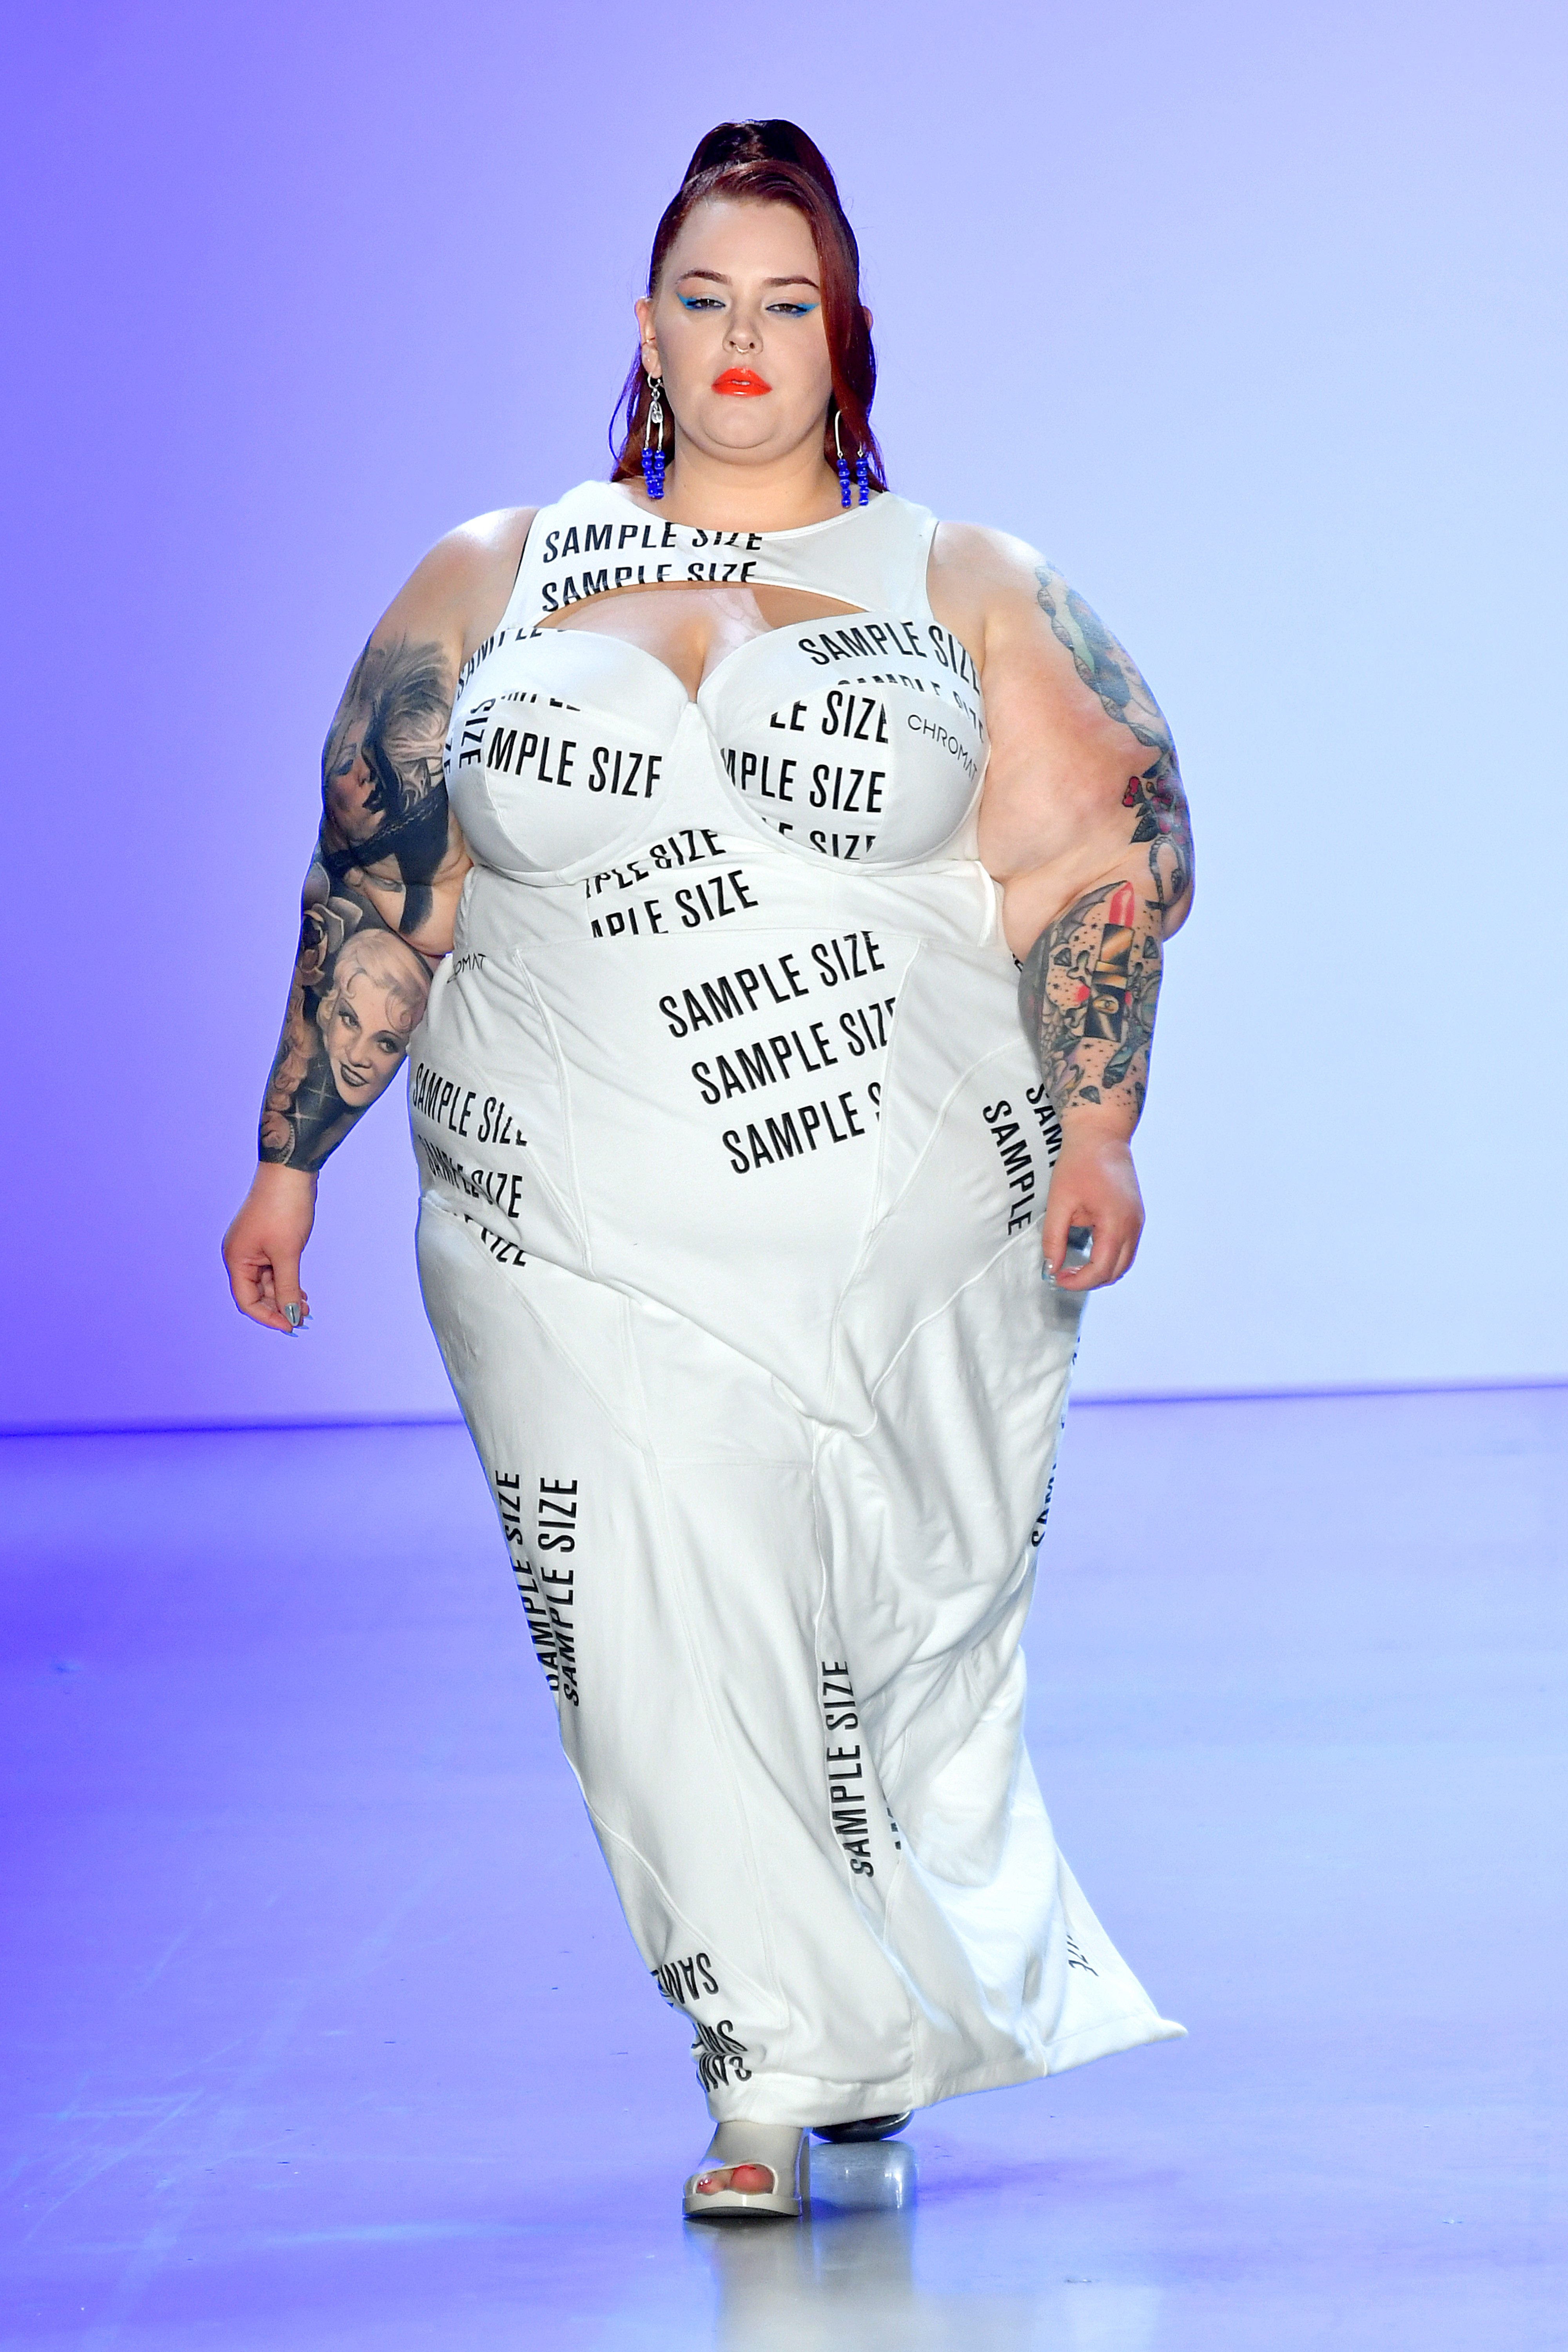 Tess Holliday no New York Fashion Week (Foto: Getty Images)